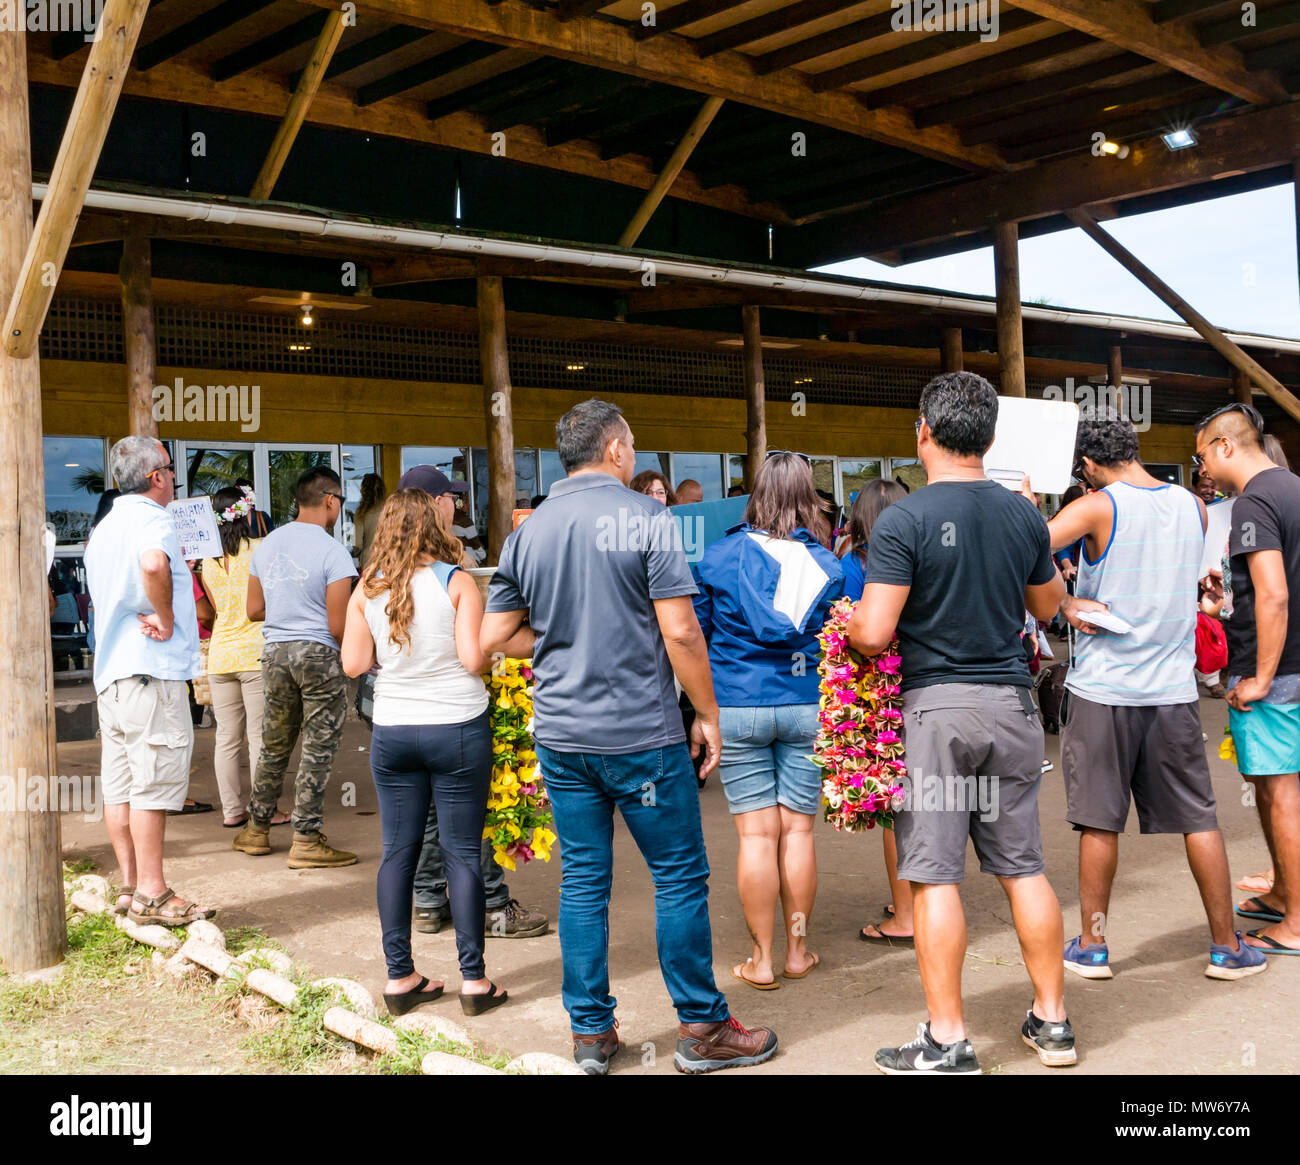 Arrivals at Mataveri International airport, Easter Island, Chile, with tourists being greeted by tour operators welcoming them with lei garlands Stock Photo